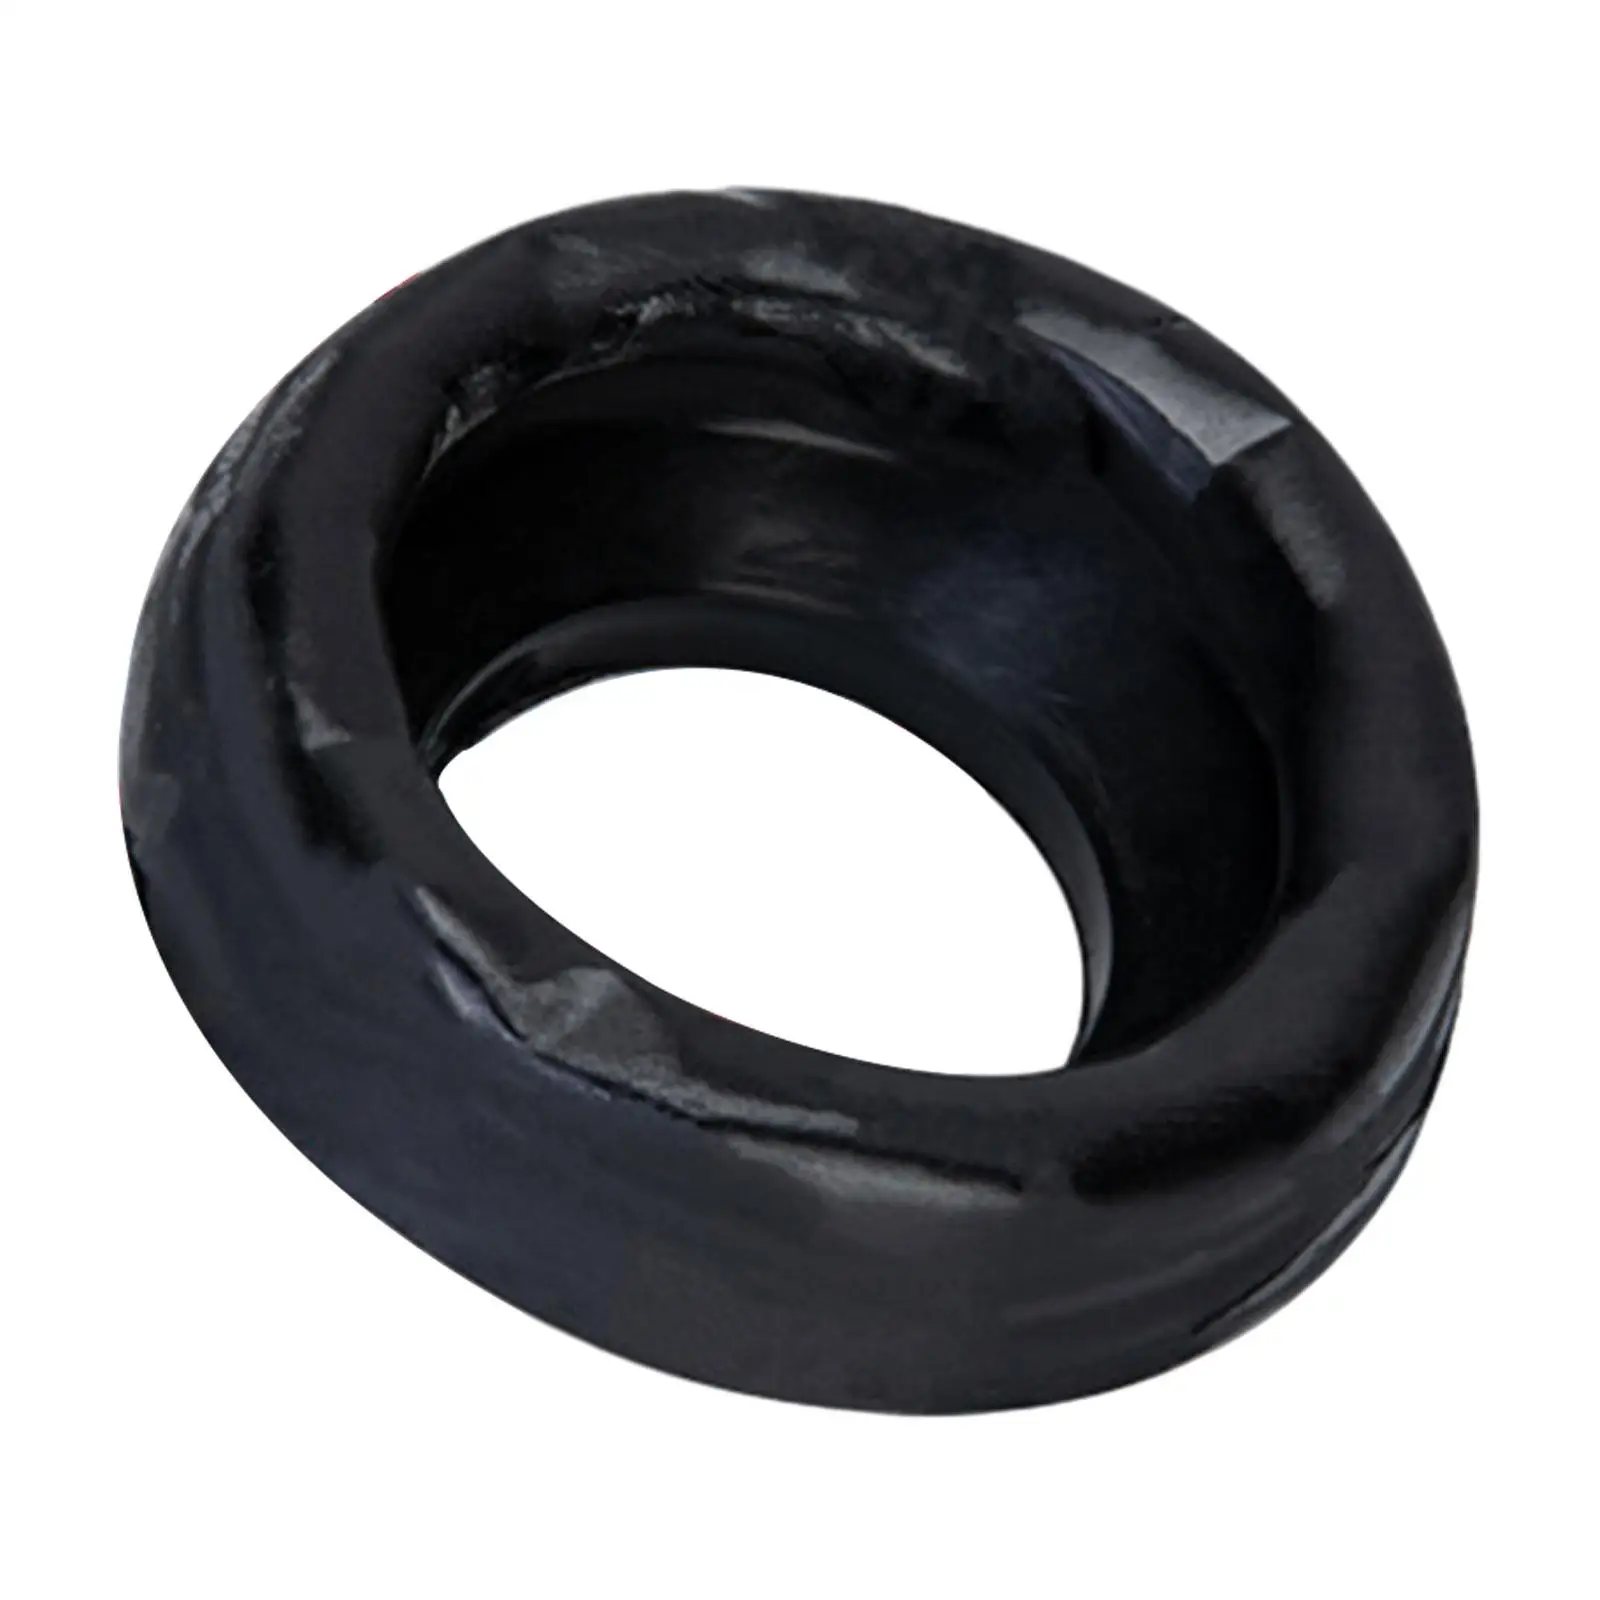 Toilet Bowl Flange Ring, Seal Washer, Thicken Portable Tank Replacement,